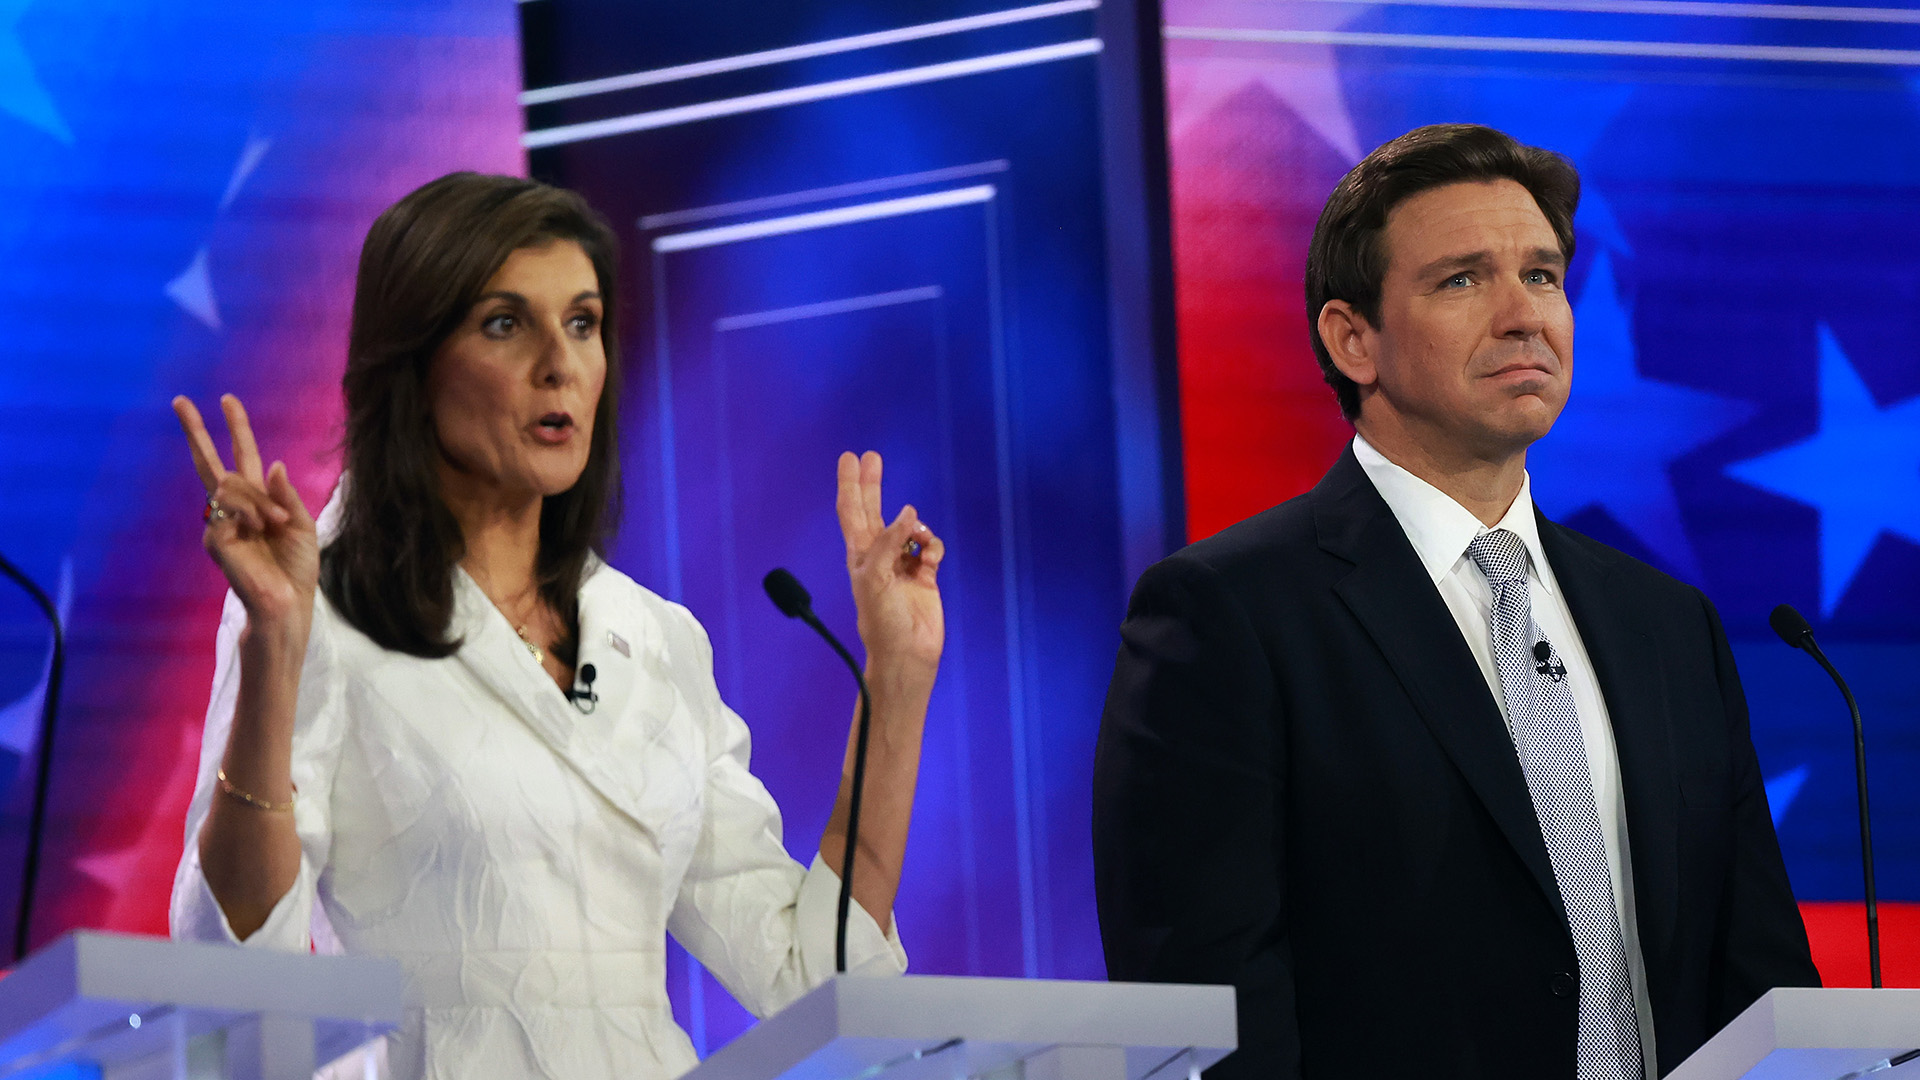 MIAMI, FLORIDA - NOVEMBER 08: Republican presidential candidate former U.N. Ambassador Nikki Haley speaks alongside Florida Gov. Ron DeSantis during the NBC News Republican Presidential Primary Debate at the Adrienne Arsht Center for the Performing Arts of Miami-Dade County on November 8, 2023 in Miami, Florida. Five presidential hopefuls squared off in the third Republican primary debate as former U.S. President Donald Trump, currently facing indictments in four locations, declined again to participate. (Photo by Joe Raedle/Getty Images)